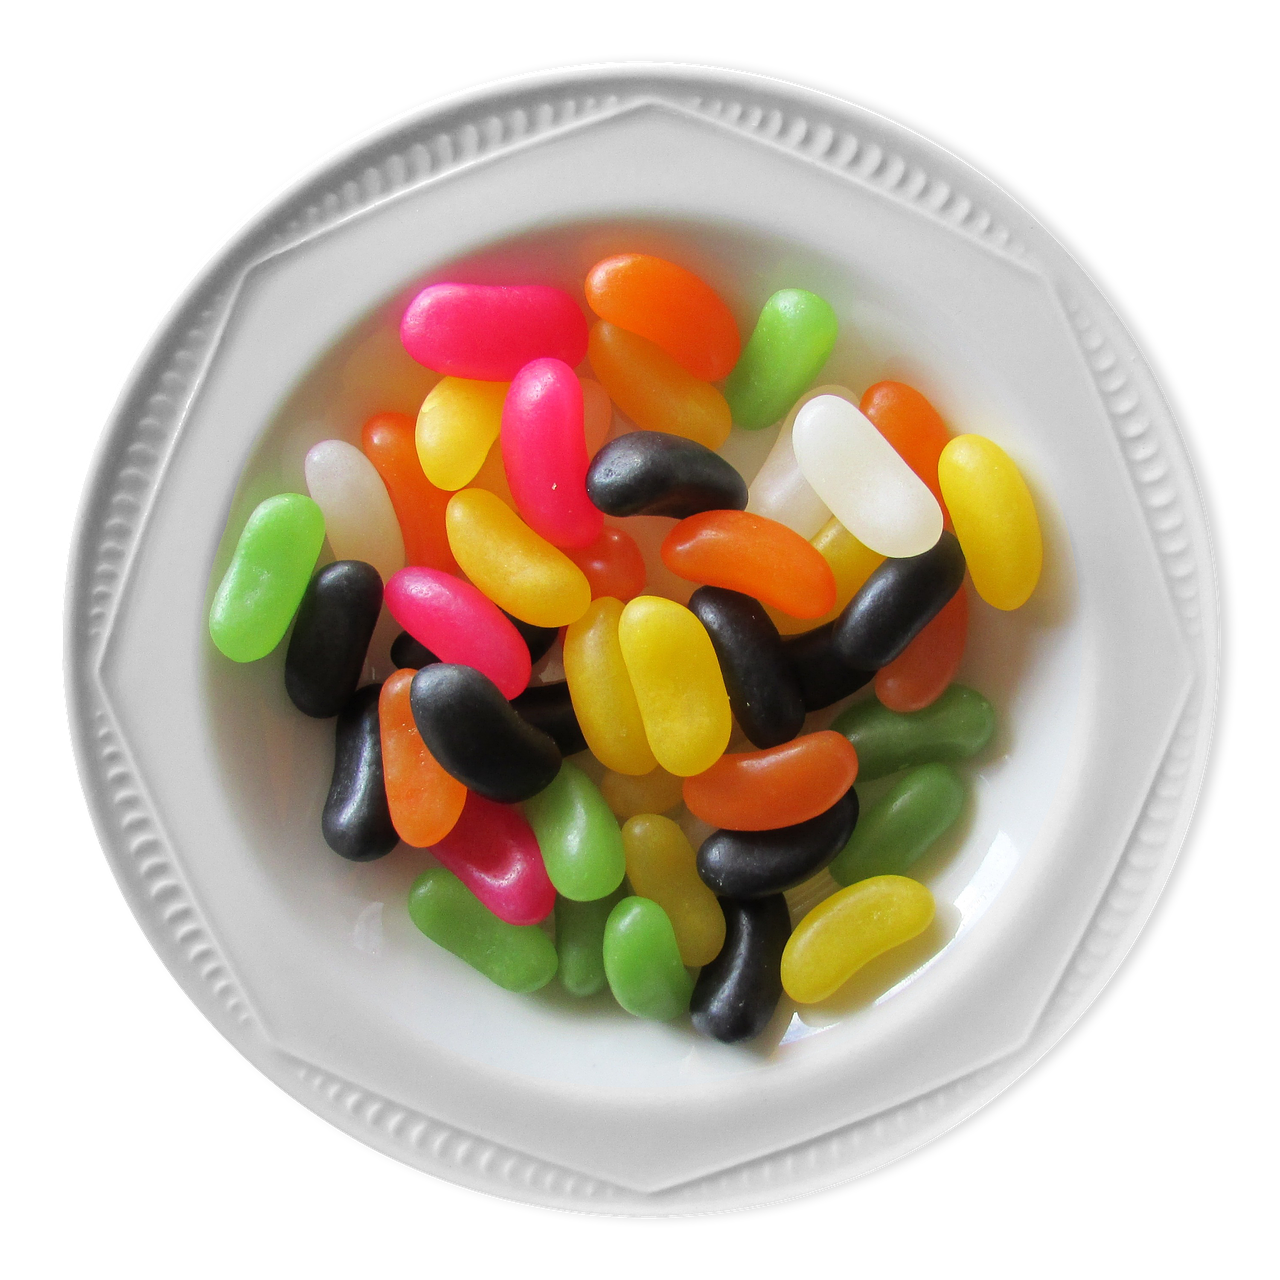 Bowl of jelly beans, jelly beans, bowl, jelly, food - free image from ...